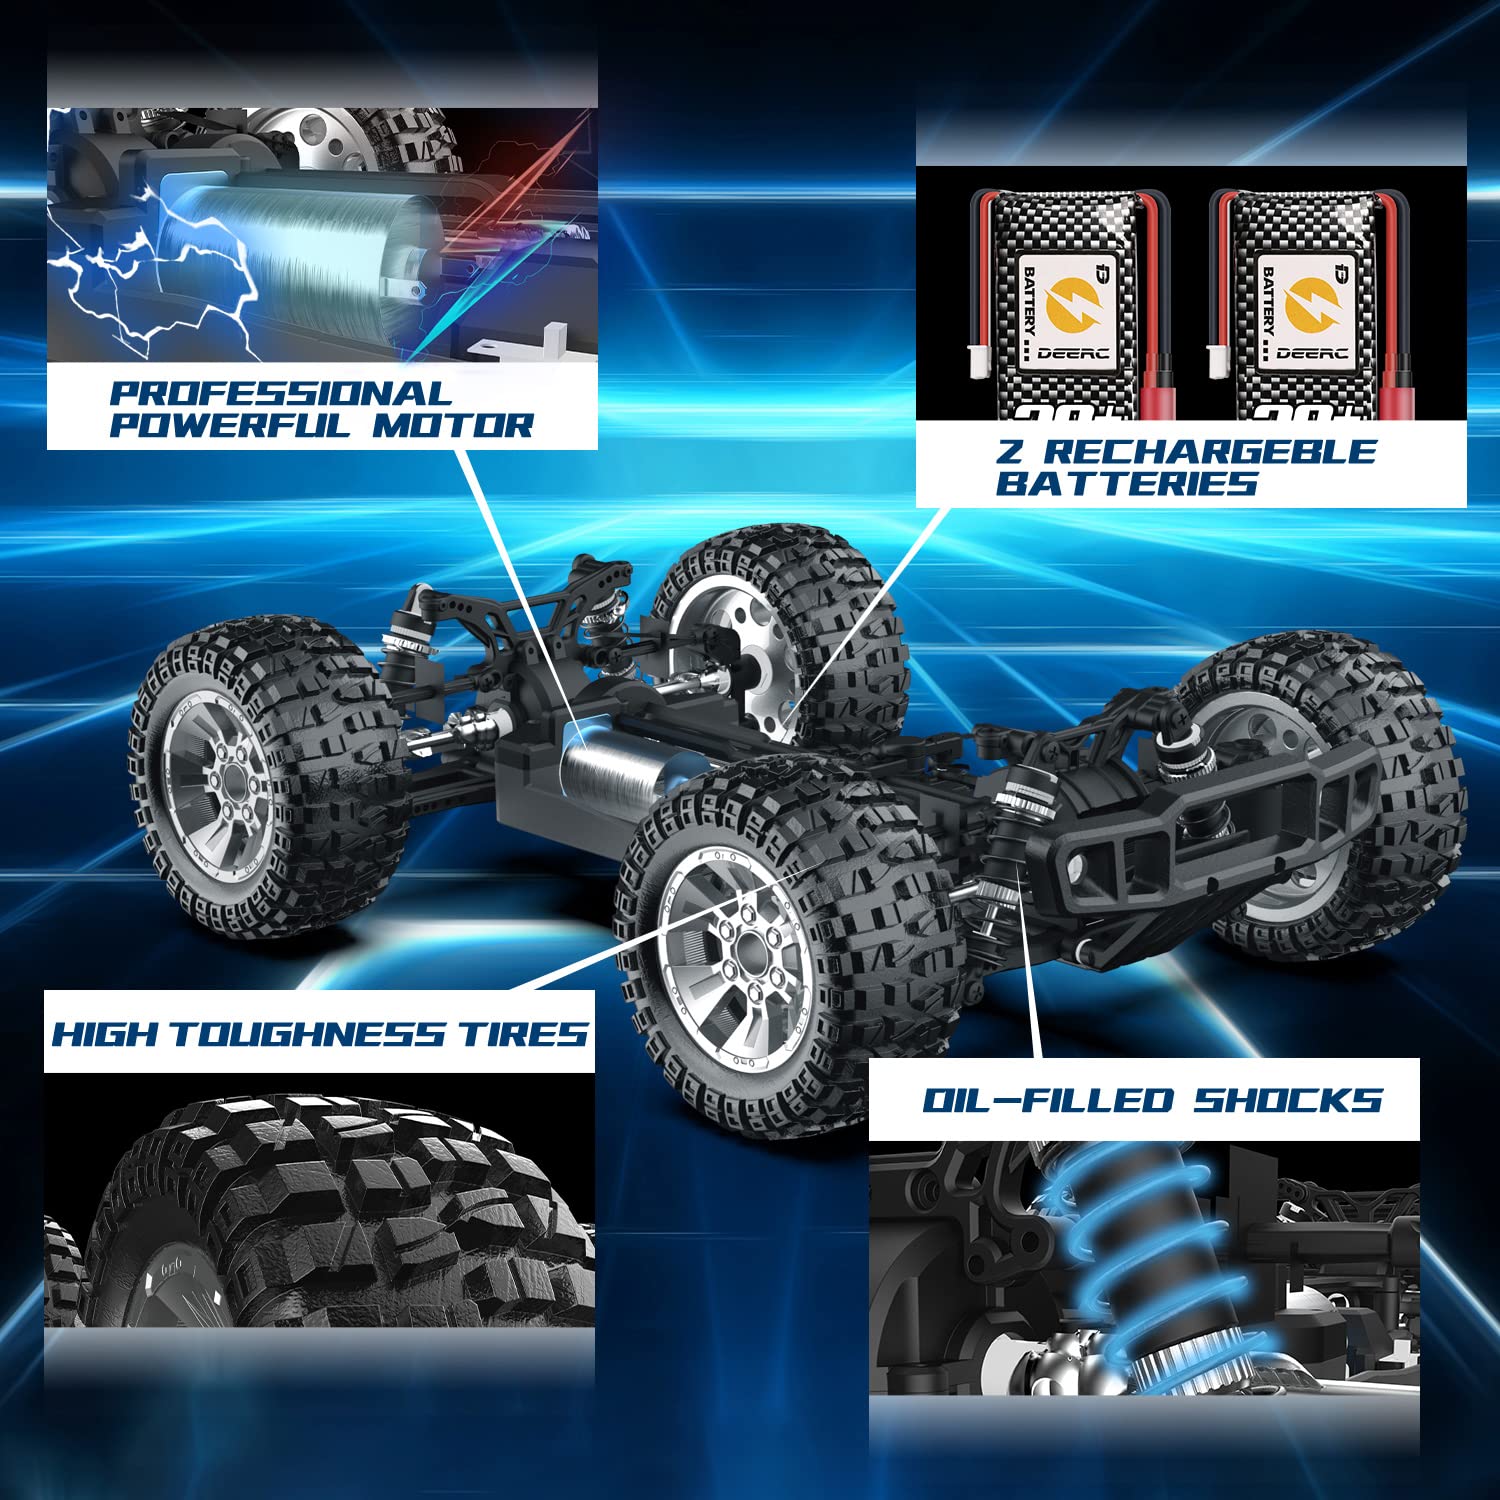 DEERC 9200E Large Hobby RC Cars, 48 KM/H 1:10 Scale Fast High Speed Remote Control Car for Adult Boy, 4WD 2.4GHz Off Road Monster RC Truck Toy All Terrain Racing,2 Batteries for 40 Min Play